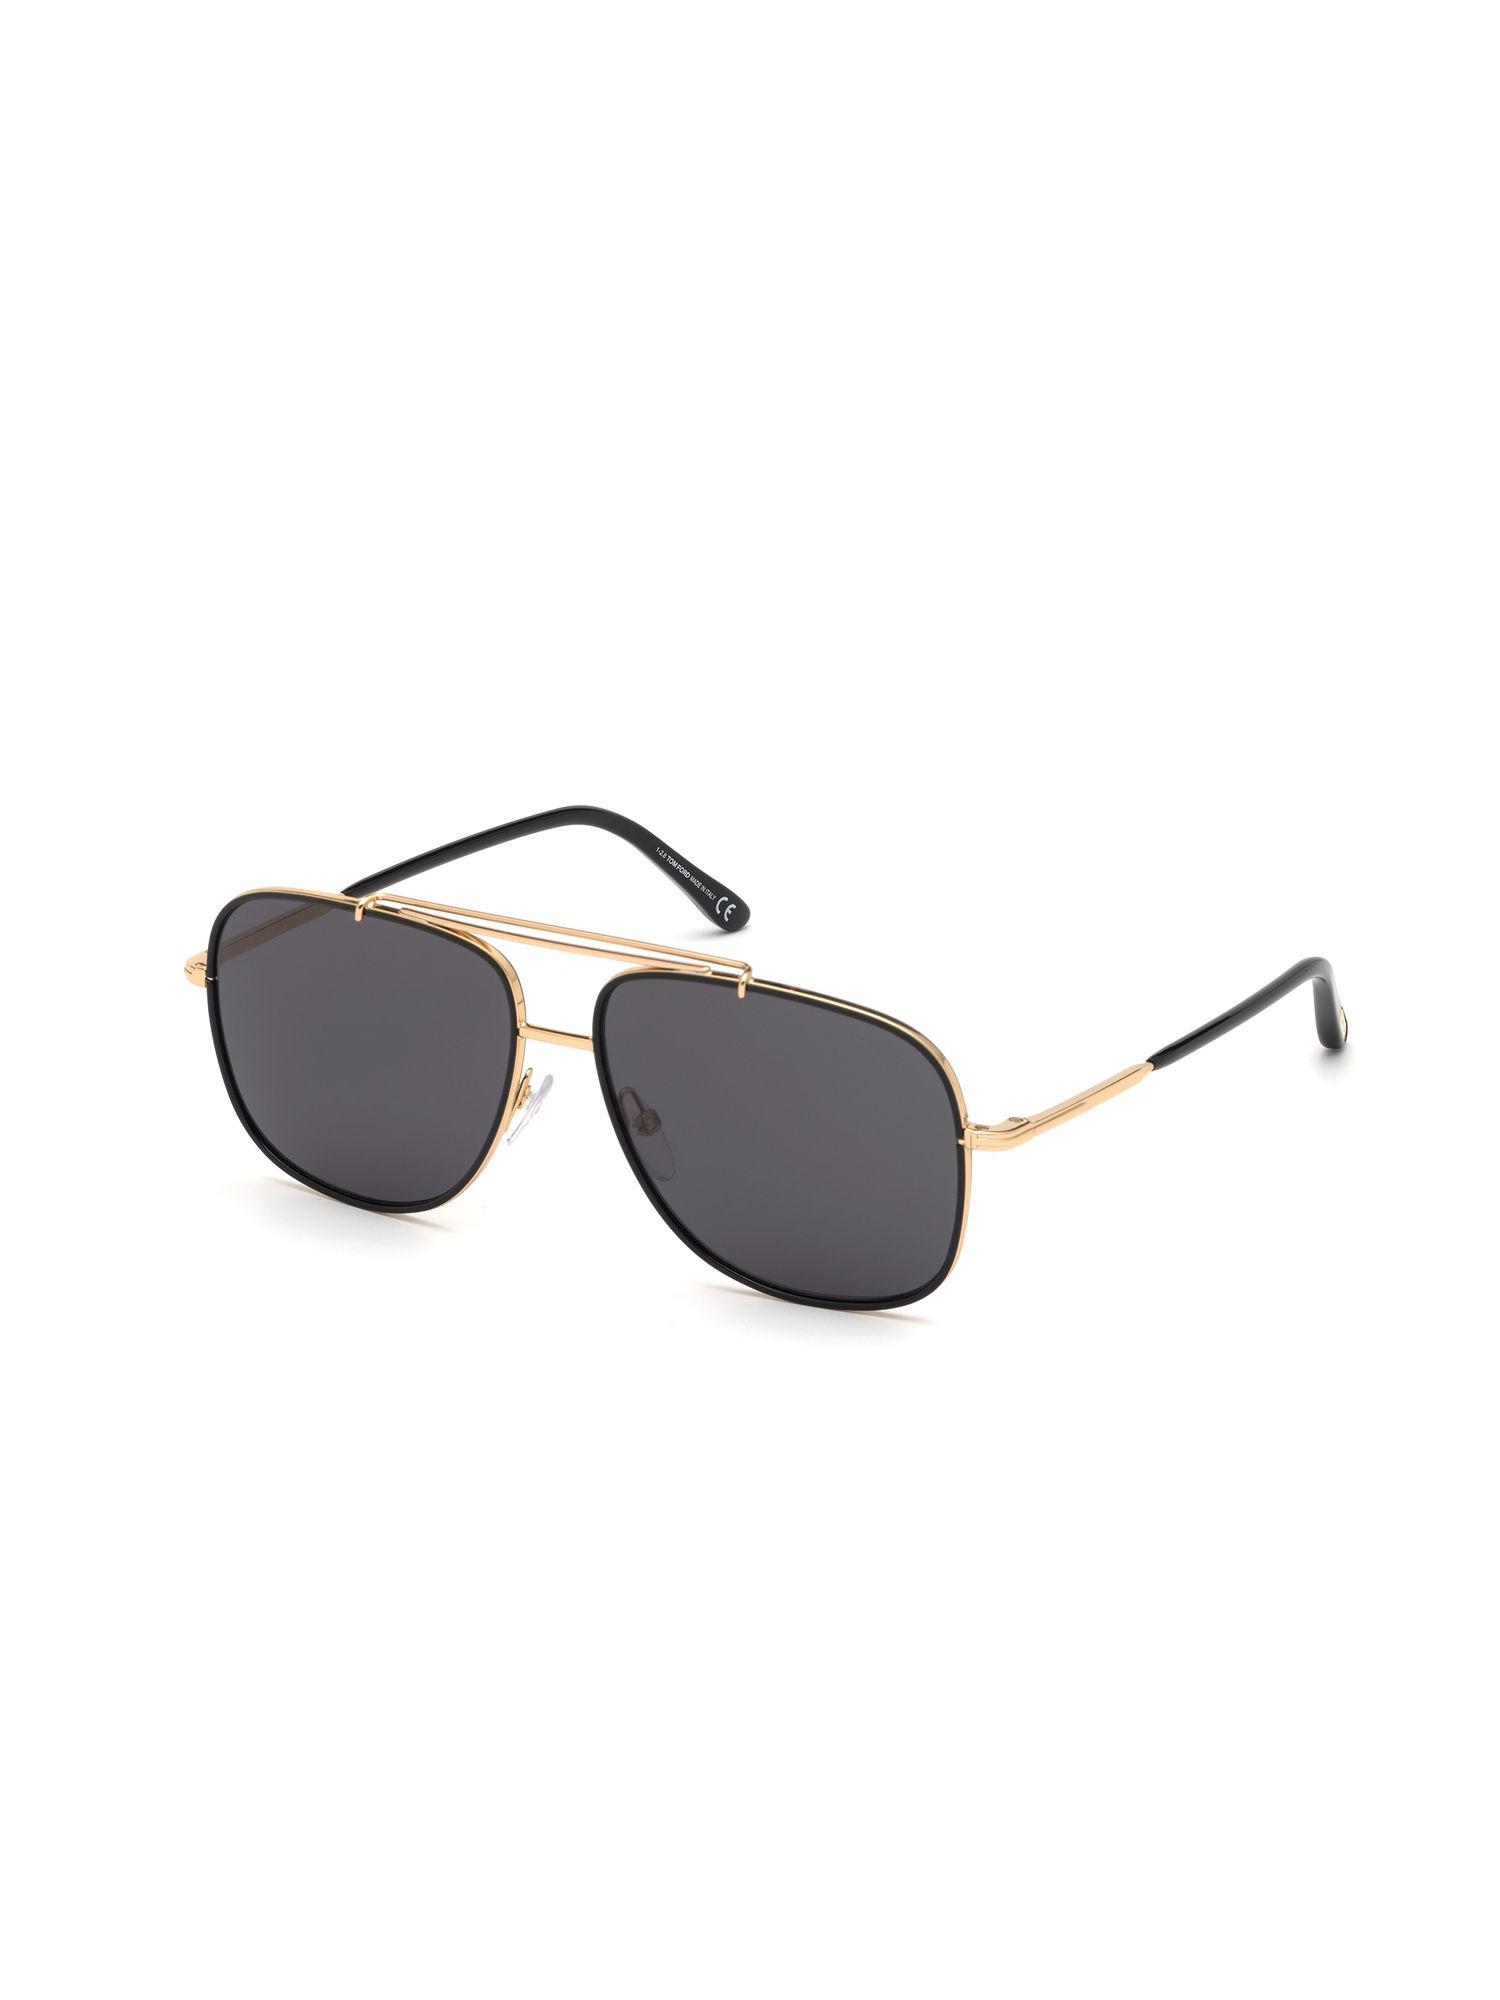 Gold Round Sunglasses - FT0693 58 30A